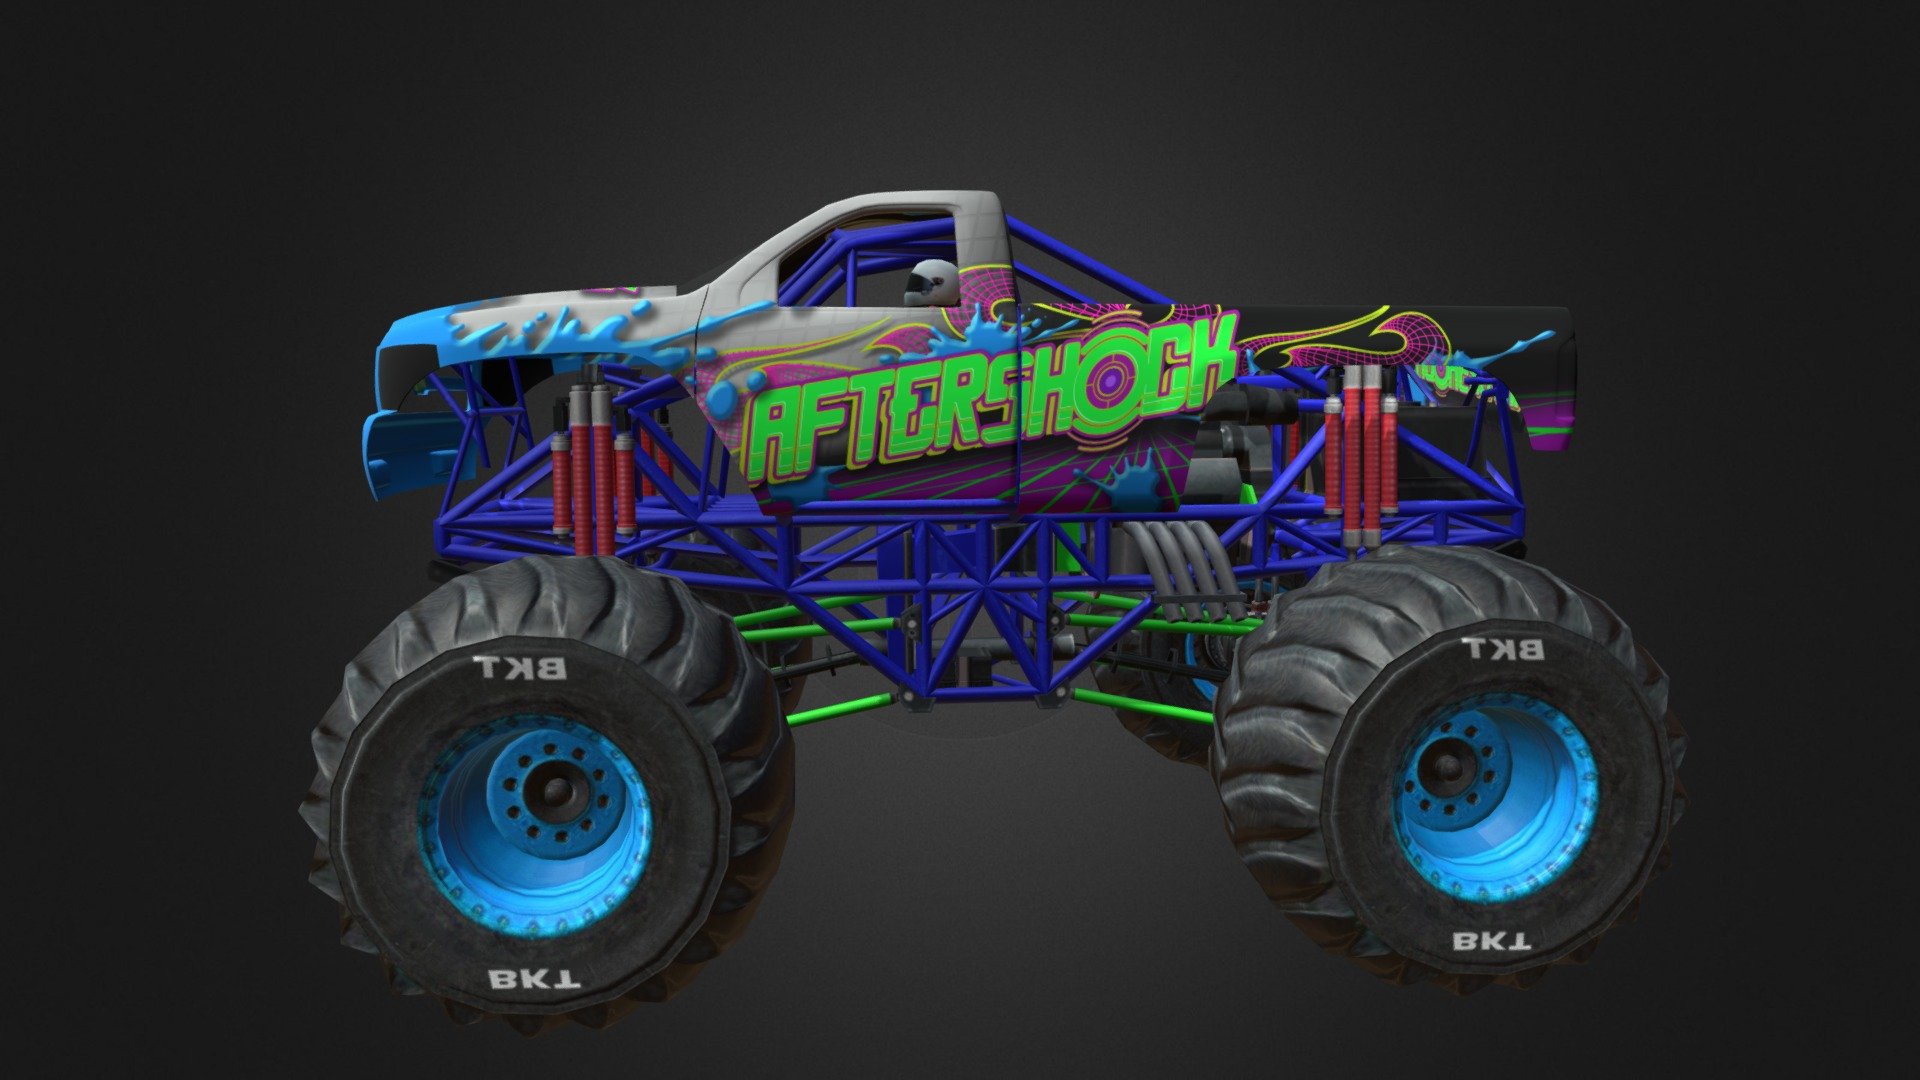 This Monster Truck Aftershock for Mobile.

All interior and underside detail.

Monster Truck Aftershock is around 6k polygons with tires, interior and driver.

Driver model is a separate mesh.

These are optimized models so doors, hood or trunk DO NOT open.

Wheels have spindle nodes for easy animation. Monster Truck have logical hierarchy and naming.

All textures are available in PNG format 3d model